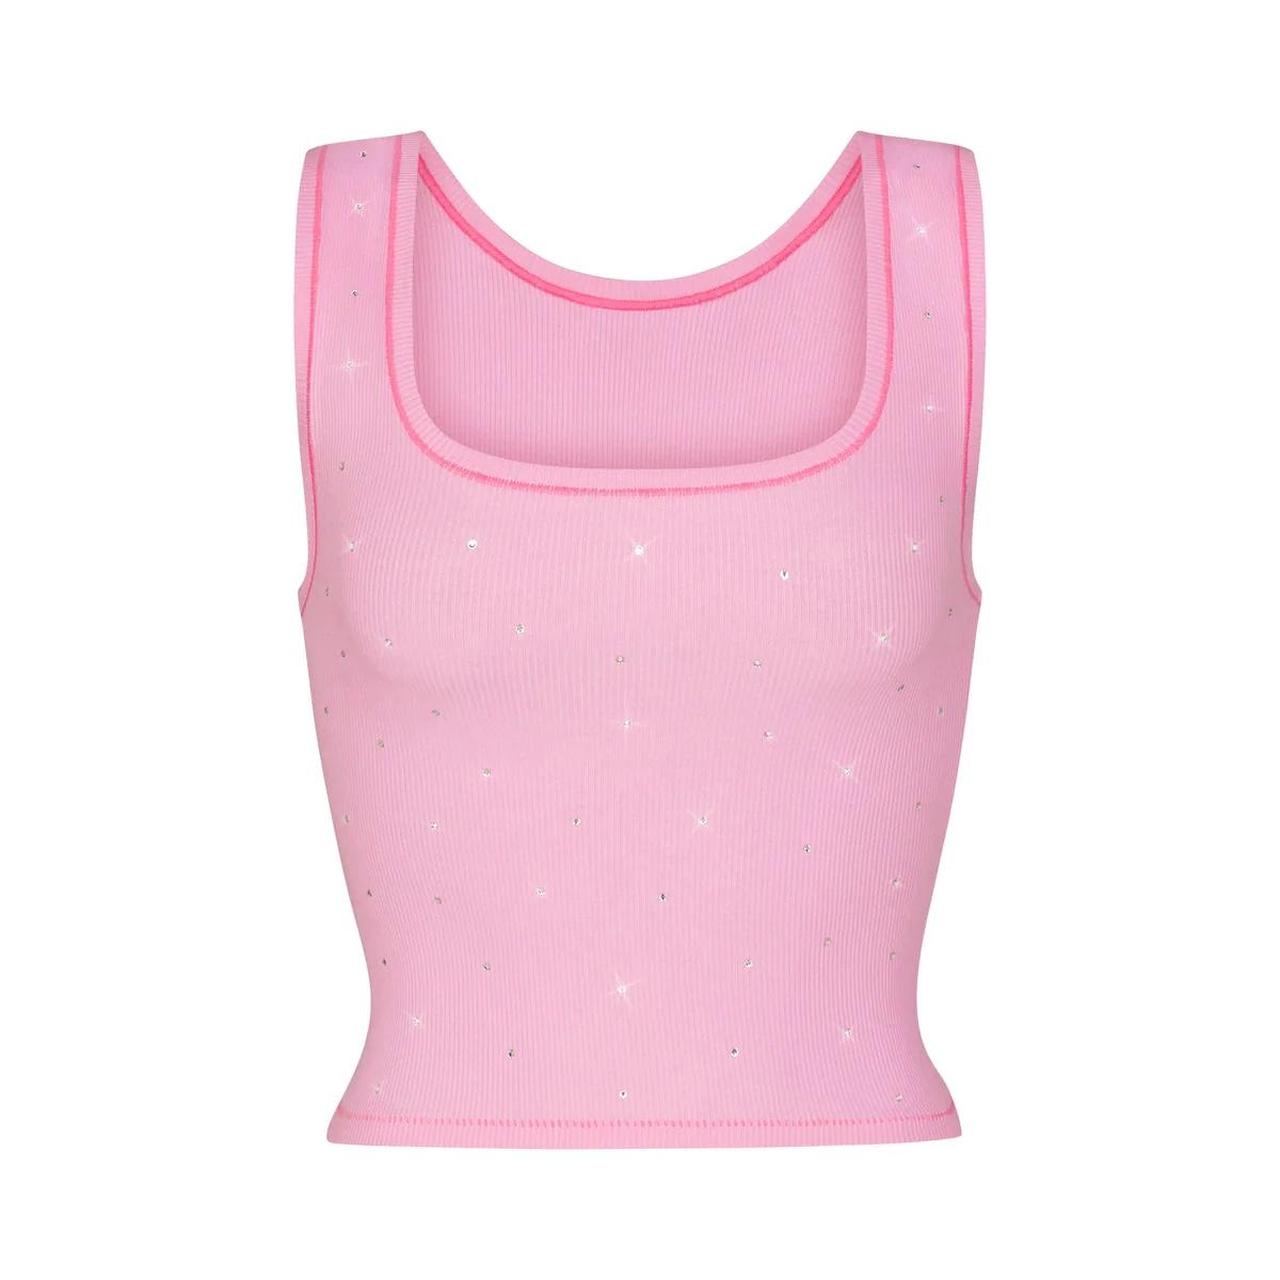 LIMITED EDITION SKIMS XS RASBERRY PINK RIBBED SET TANK TOP AND